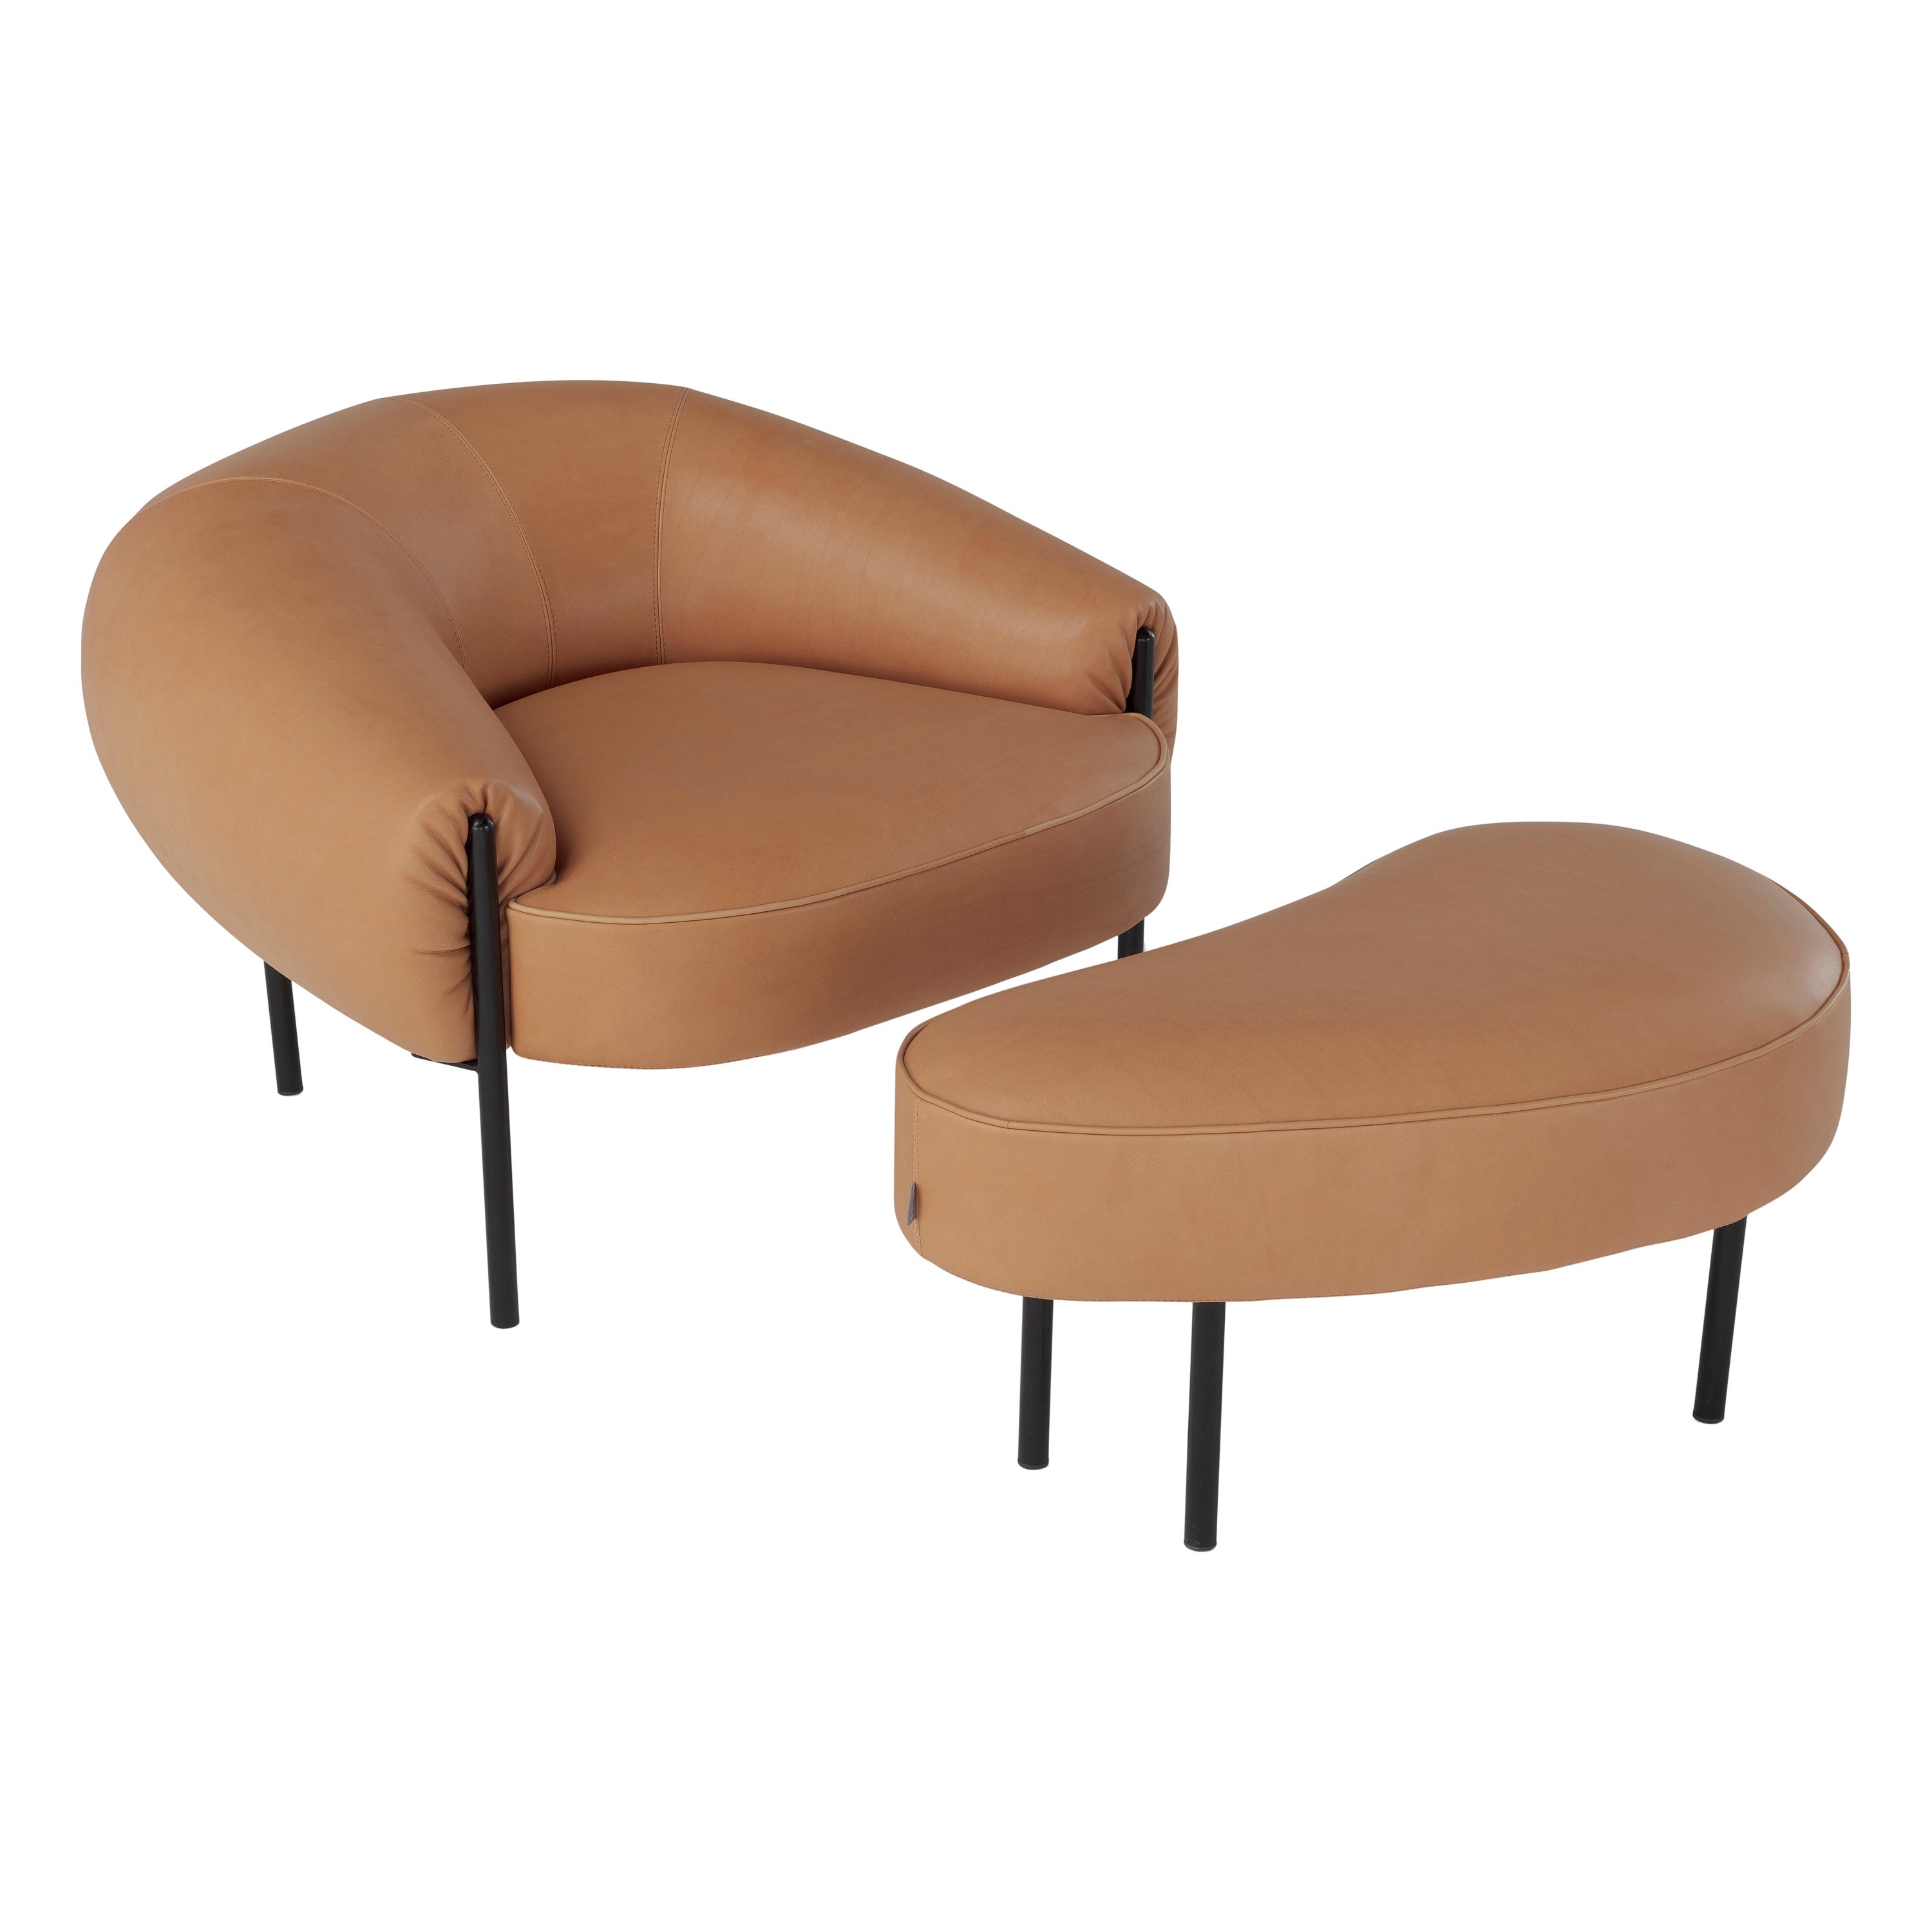 Contemporary Set 'Isola' by Amura Lab, Armchair + Ottoman, Leather Daino 01 For Sale